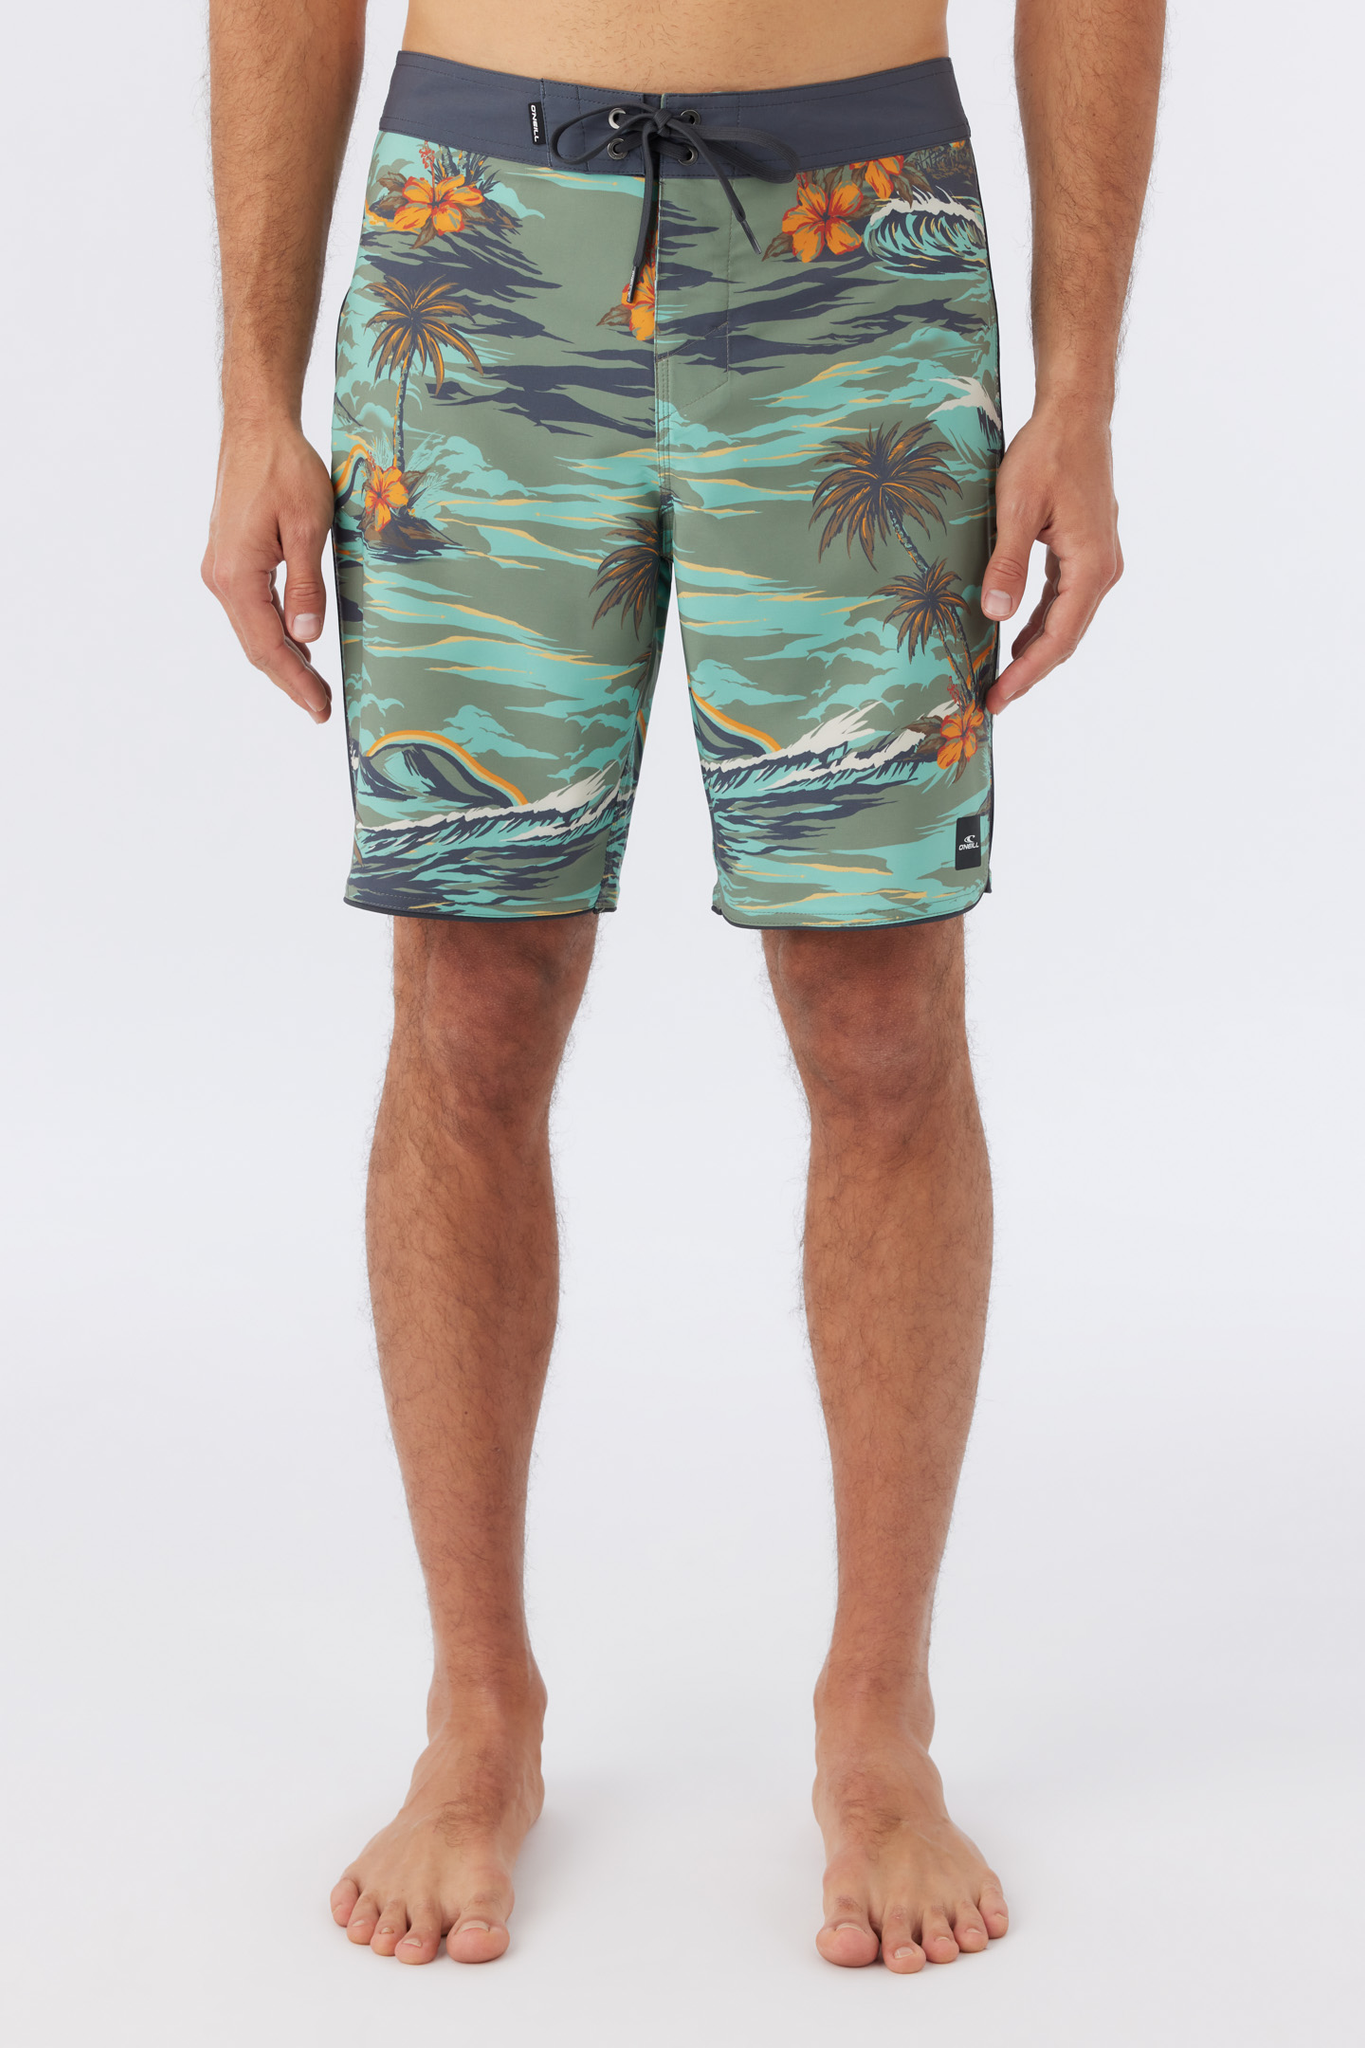 O'Neill Hyperfreak Mysto Scallop Board Shorts in Sage at Nordstrom, Size 28